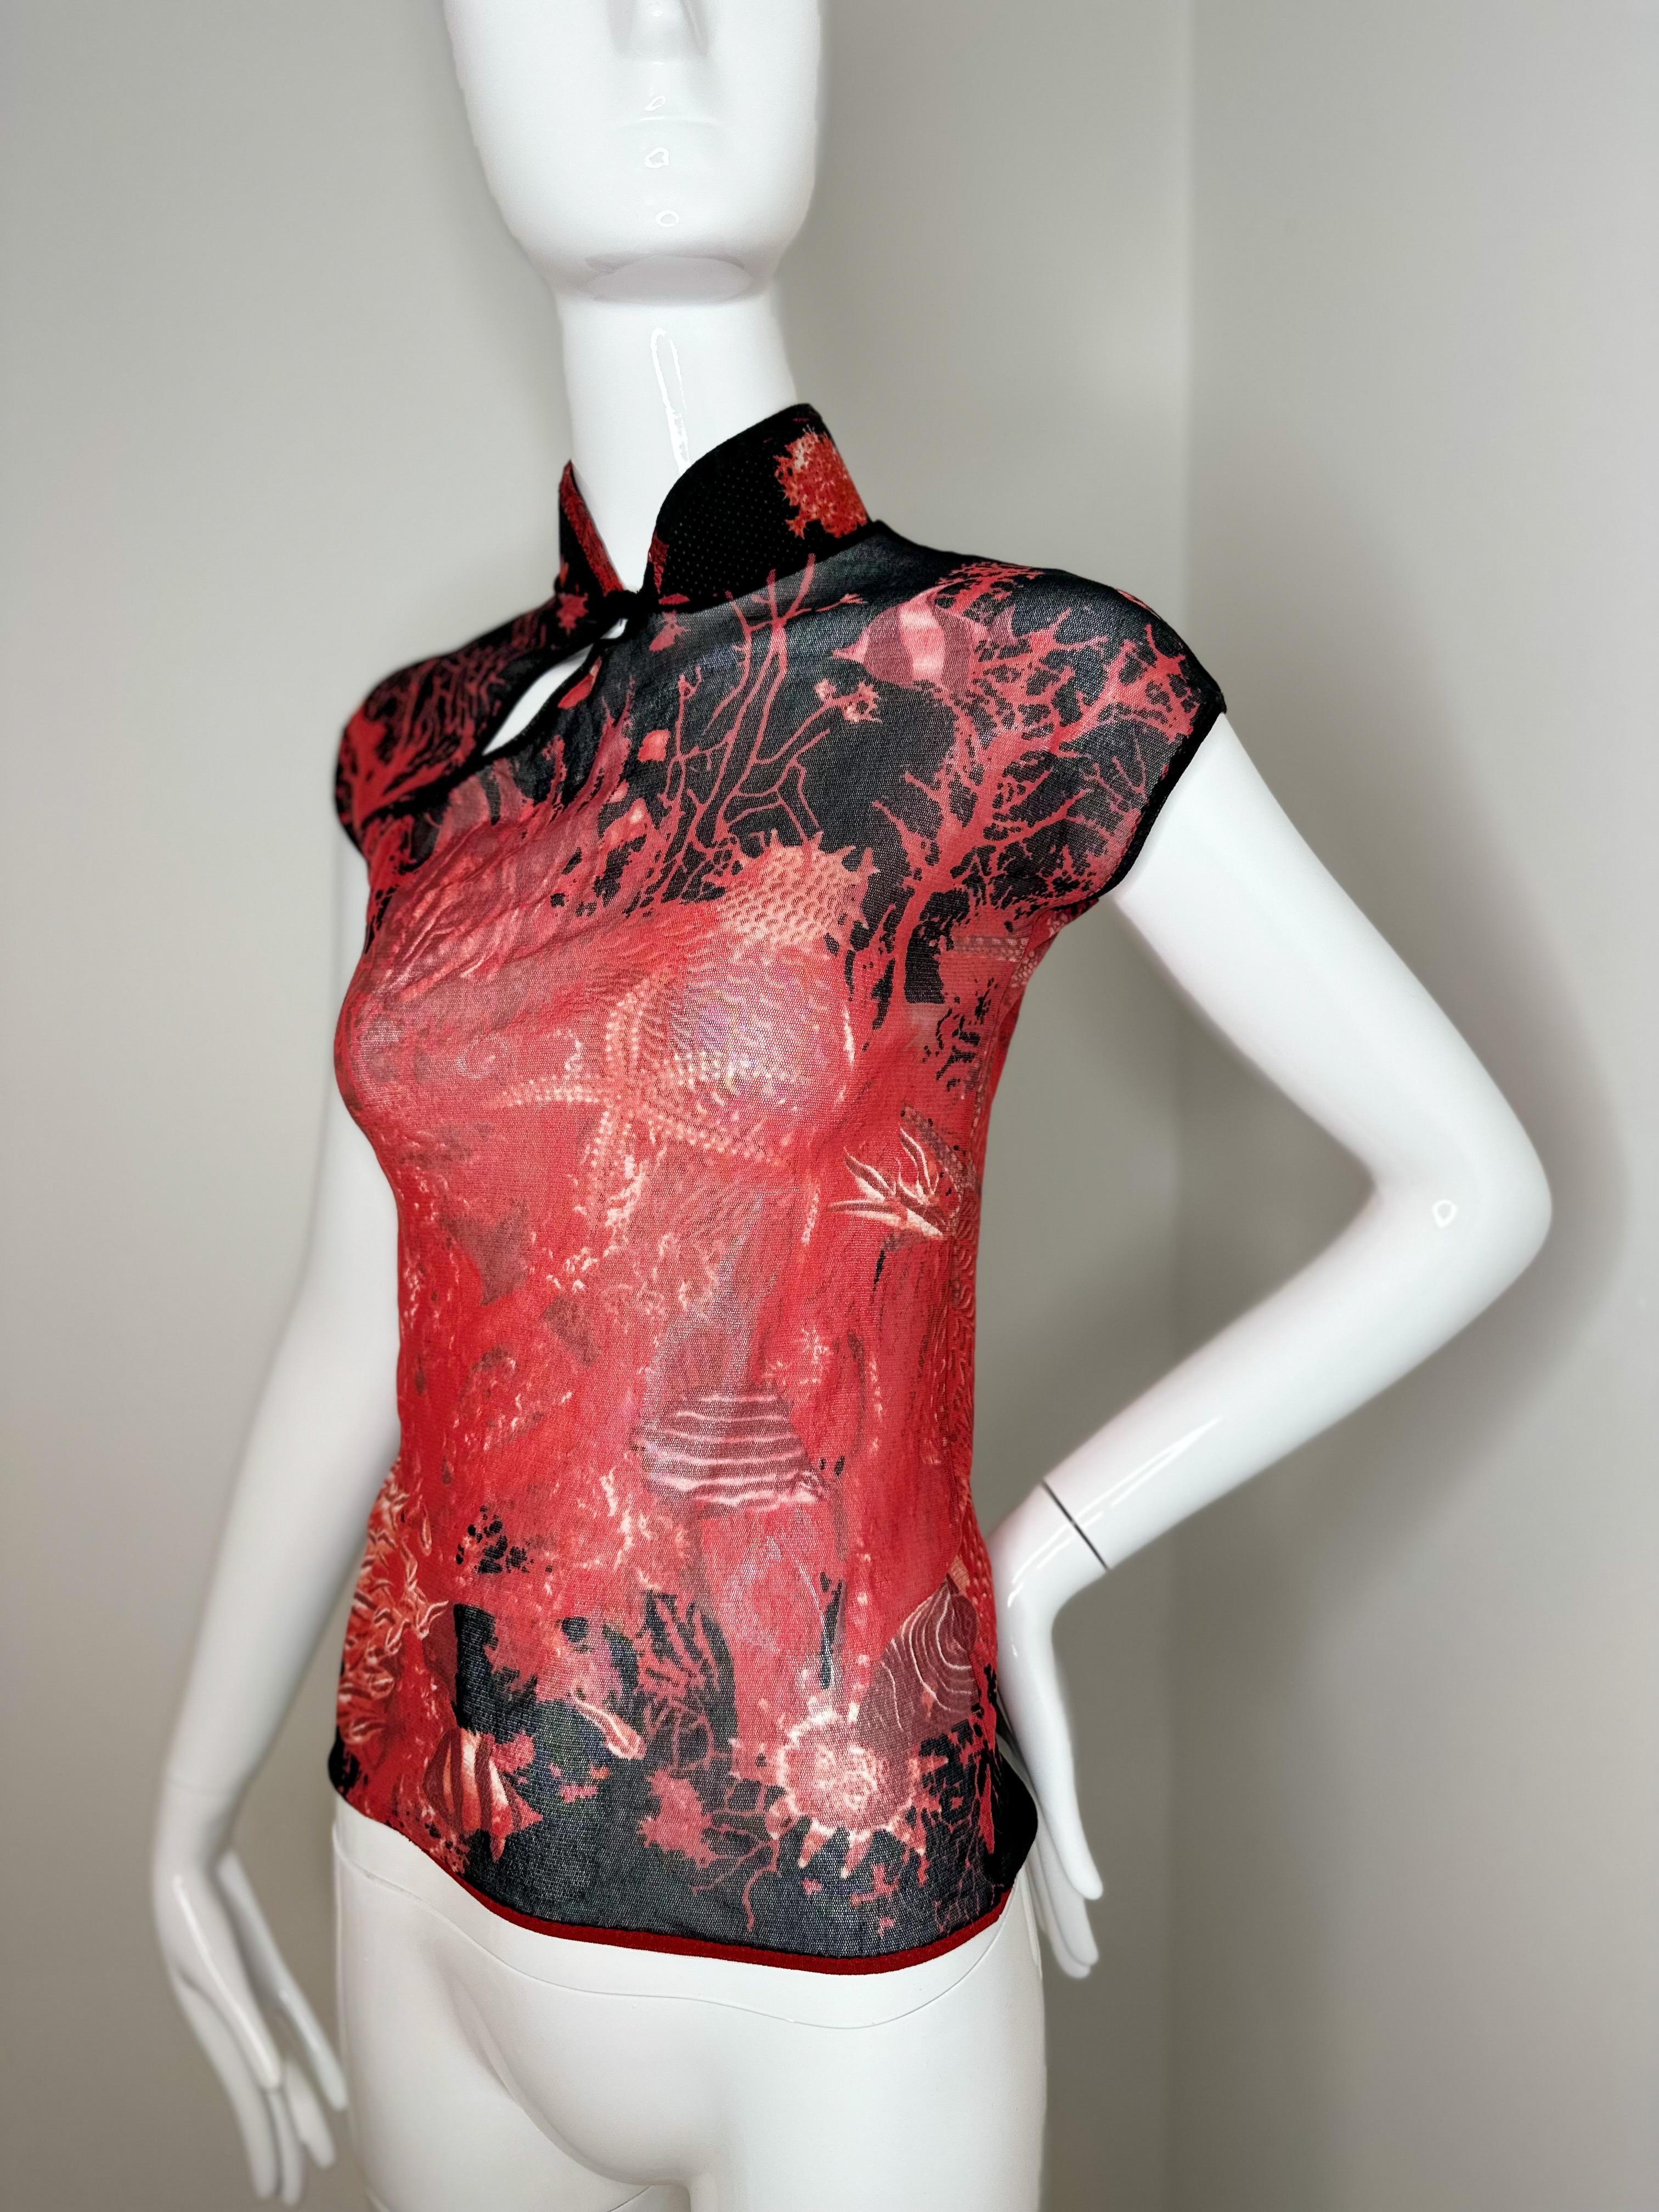 Vintage Jean Paul Gaultier red and black mesh top 
Size S
Good vintage condition: to rips, stains or snags 

Approx. flat measurements: 
Pit to pit: 14.5 inches 
Length: 21.5 inches 
Shoulder to shoulder: 15 inches 